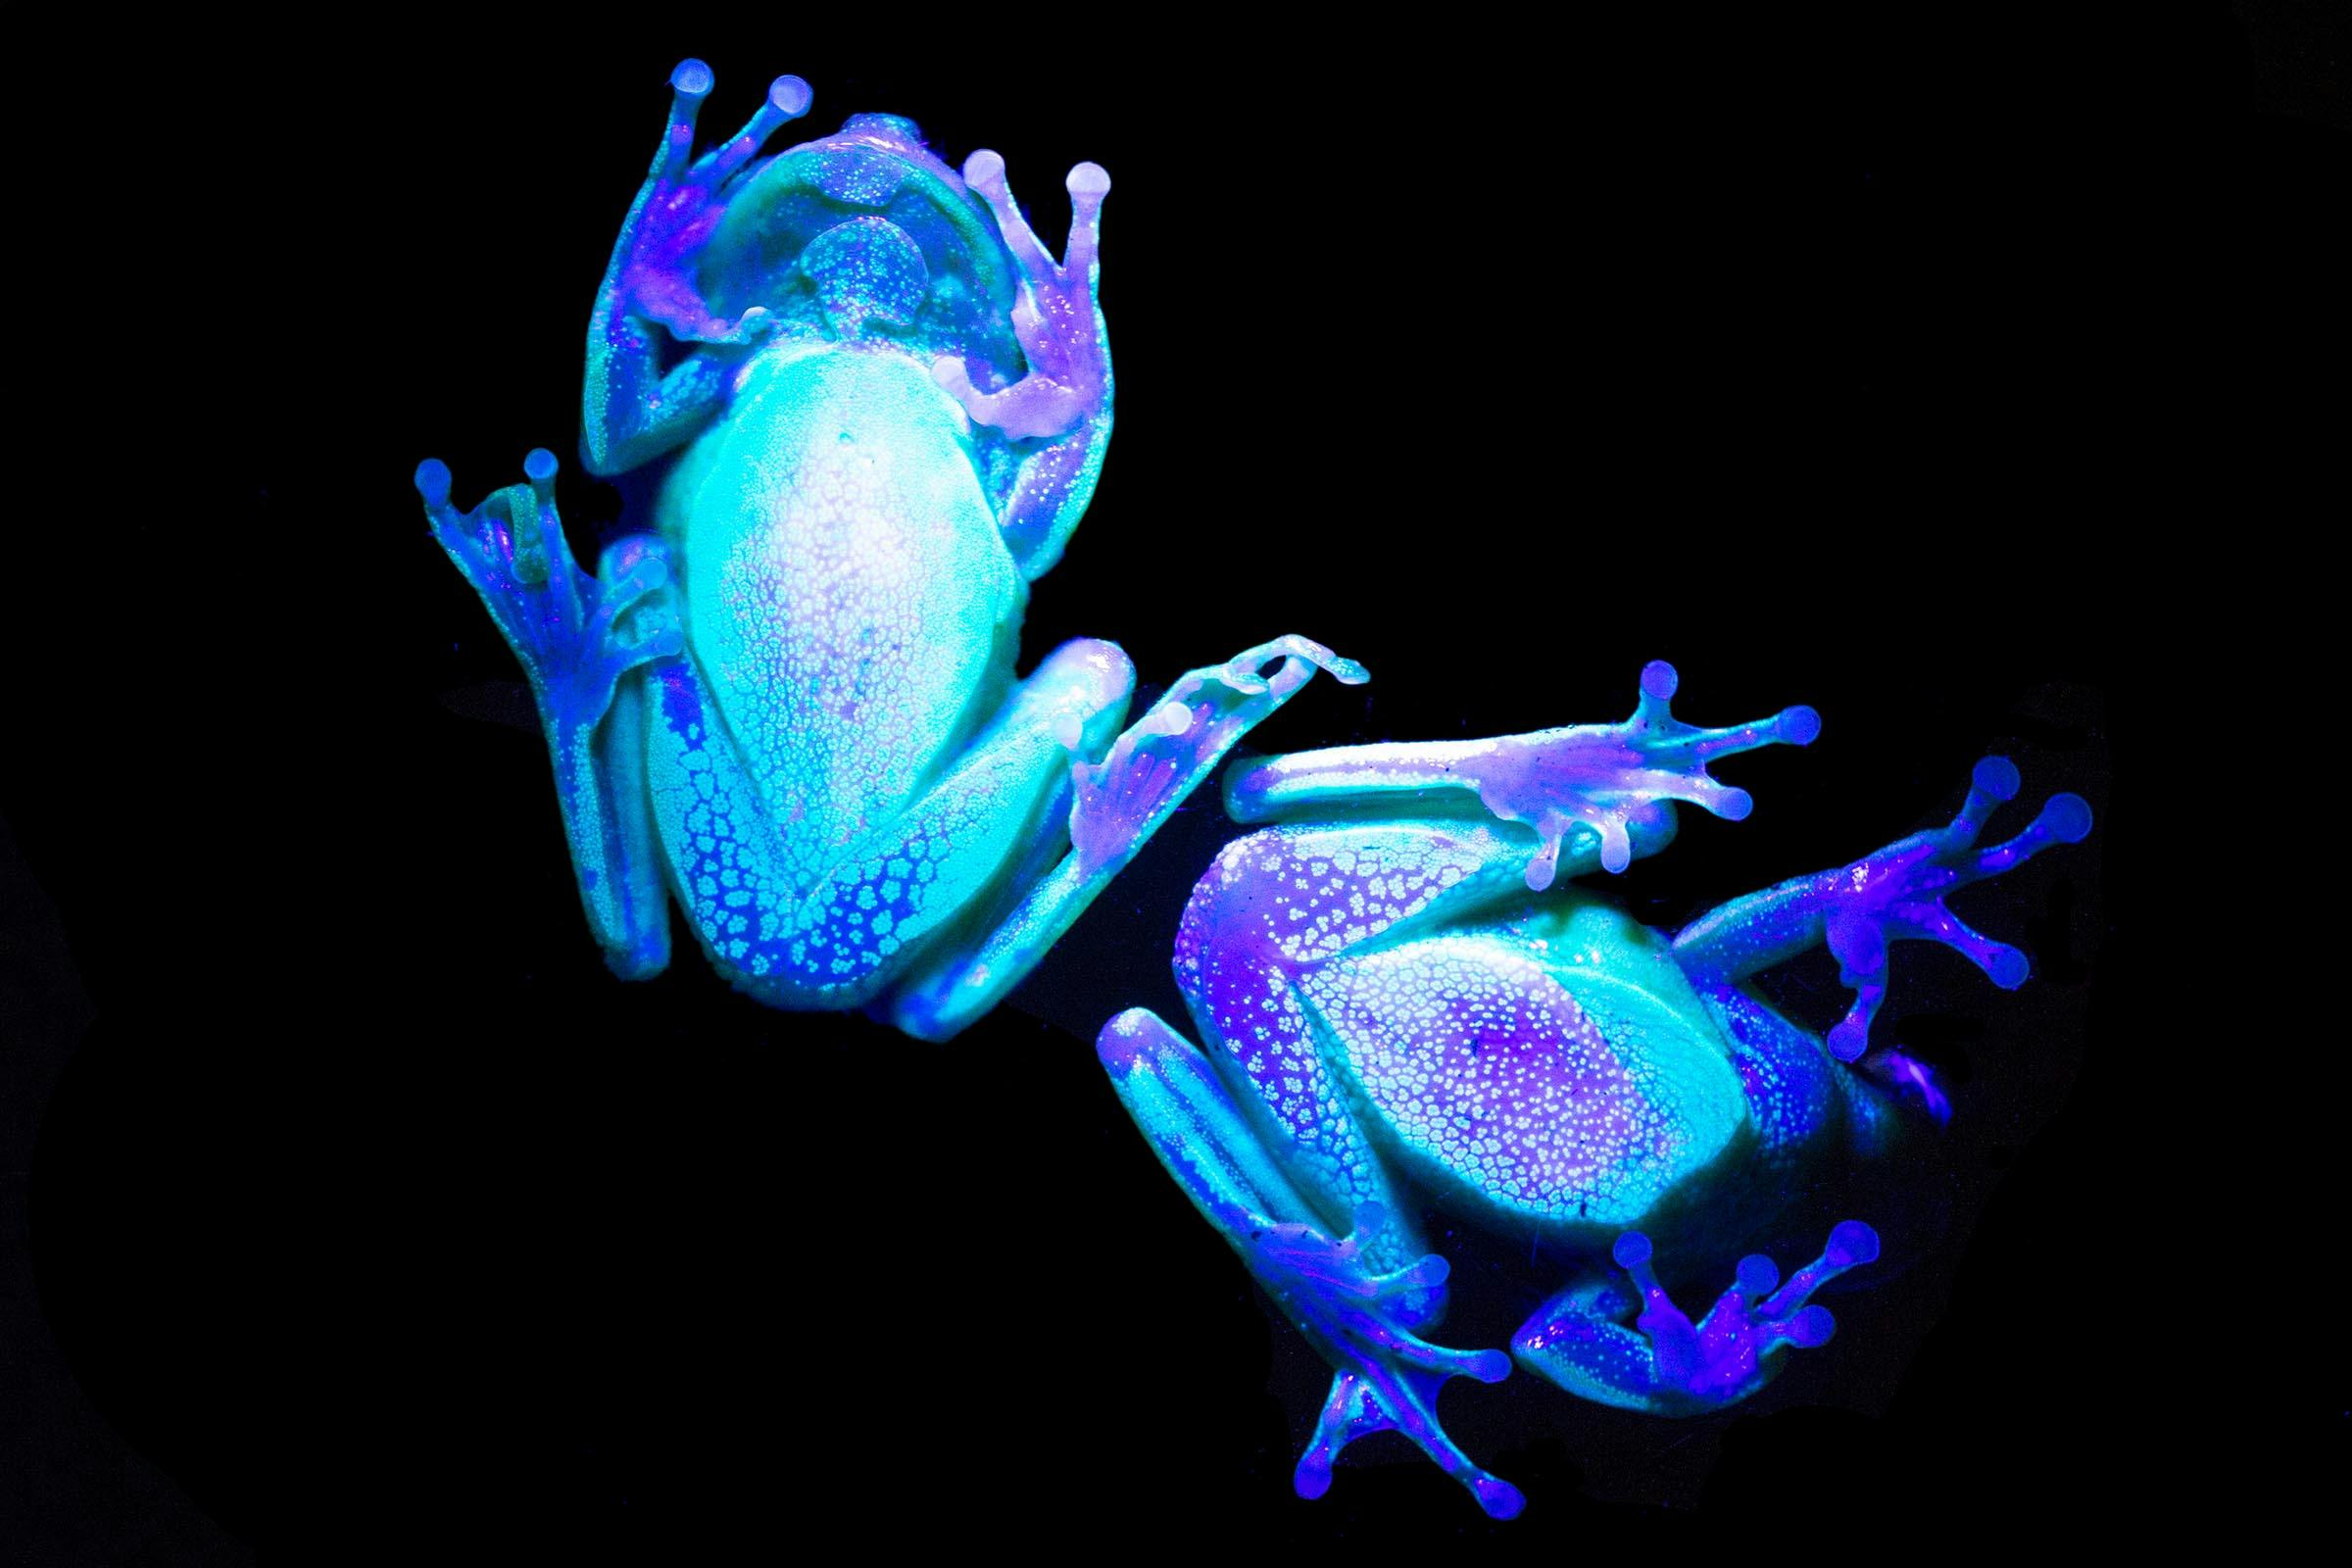 The underside of two frogs seen through glass, on a black background. They appear to glow shades of bright blue and purple.